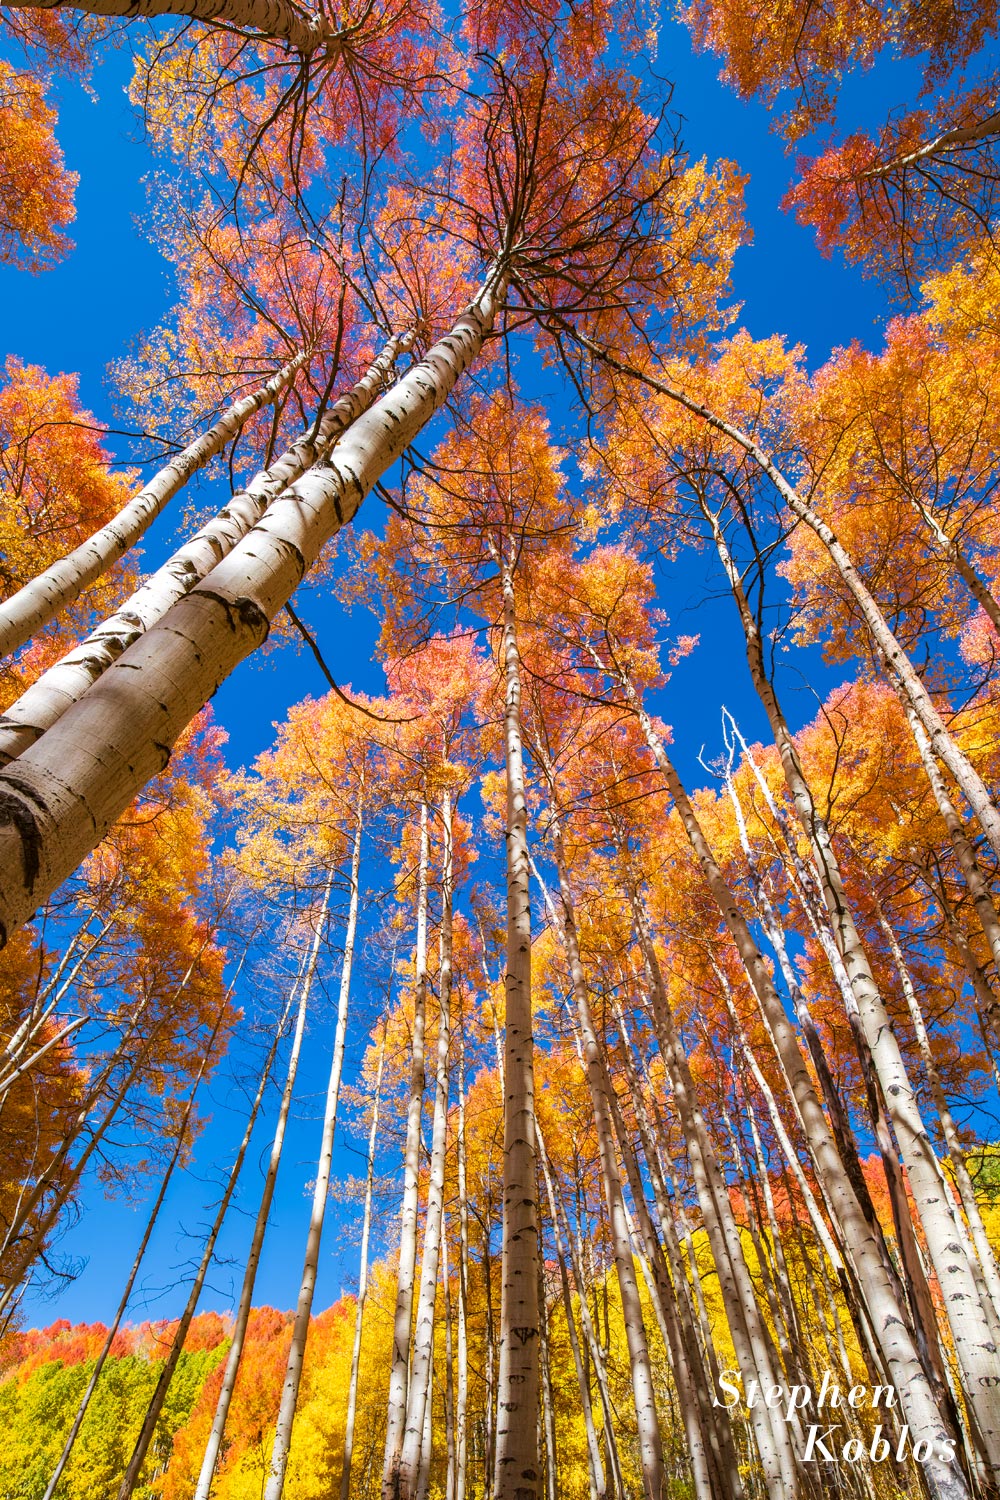 Different colored aspens near Kebler Pass. Limited Edition of 100